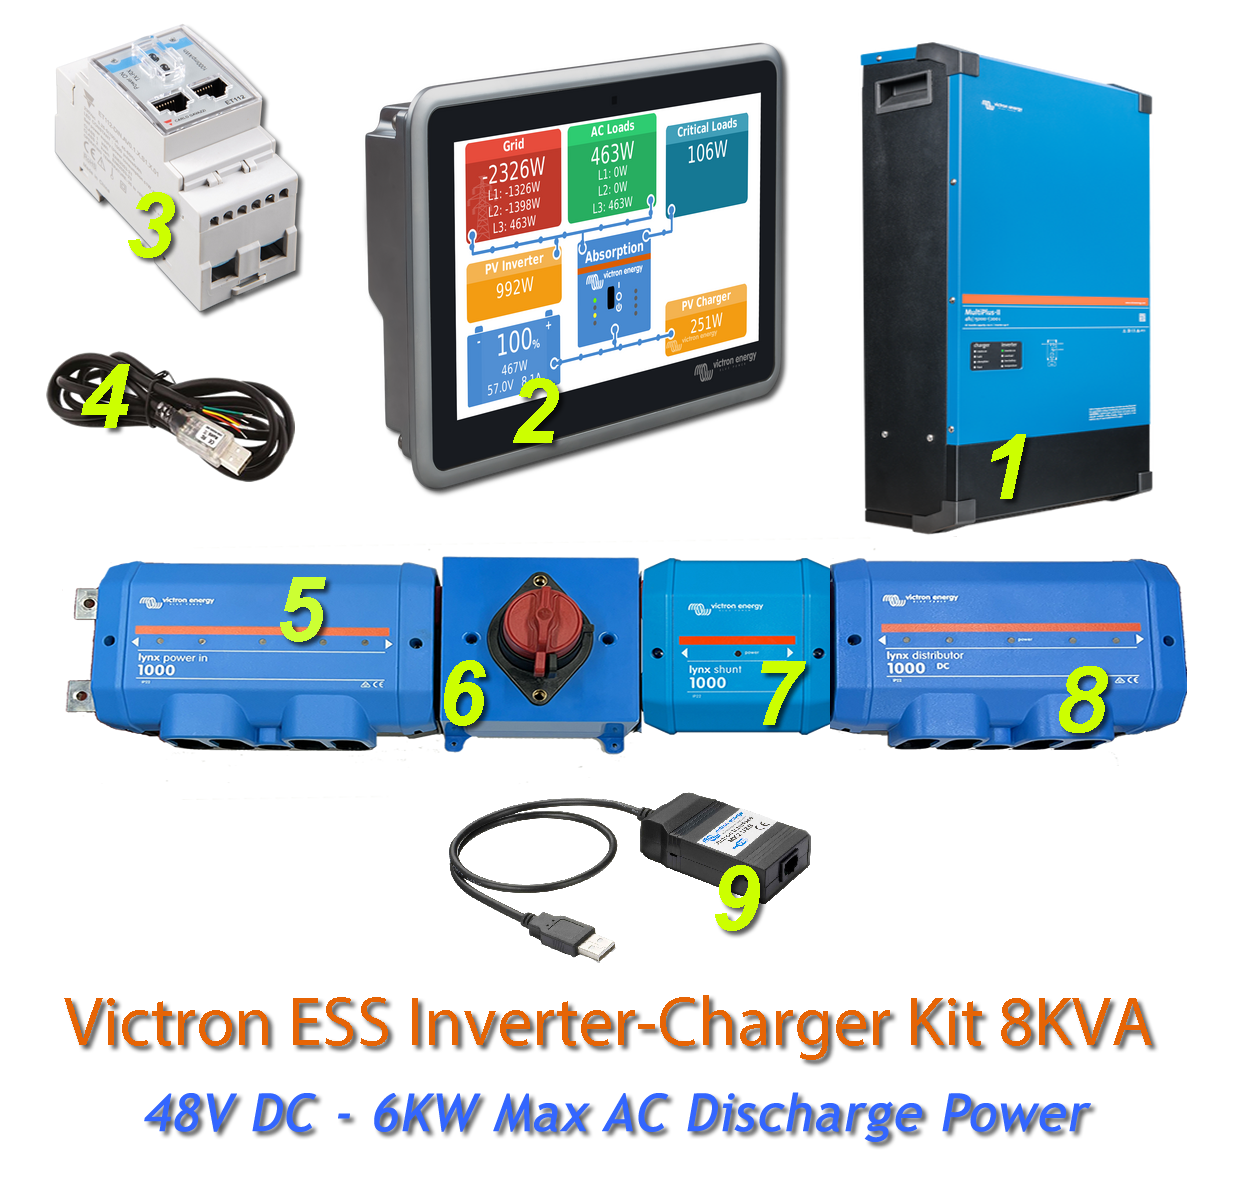 Victron Energy Multiplus II ESS Kit 48V DC - 12KW Max AC Discharge Power 200A Charging with Lynx System